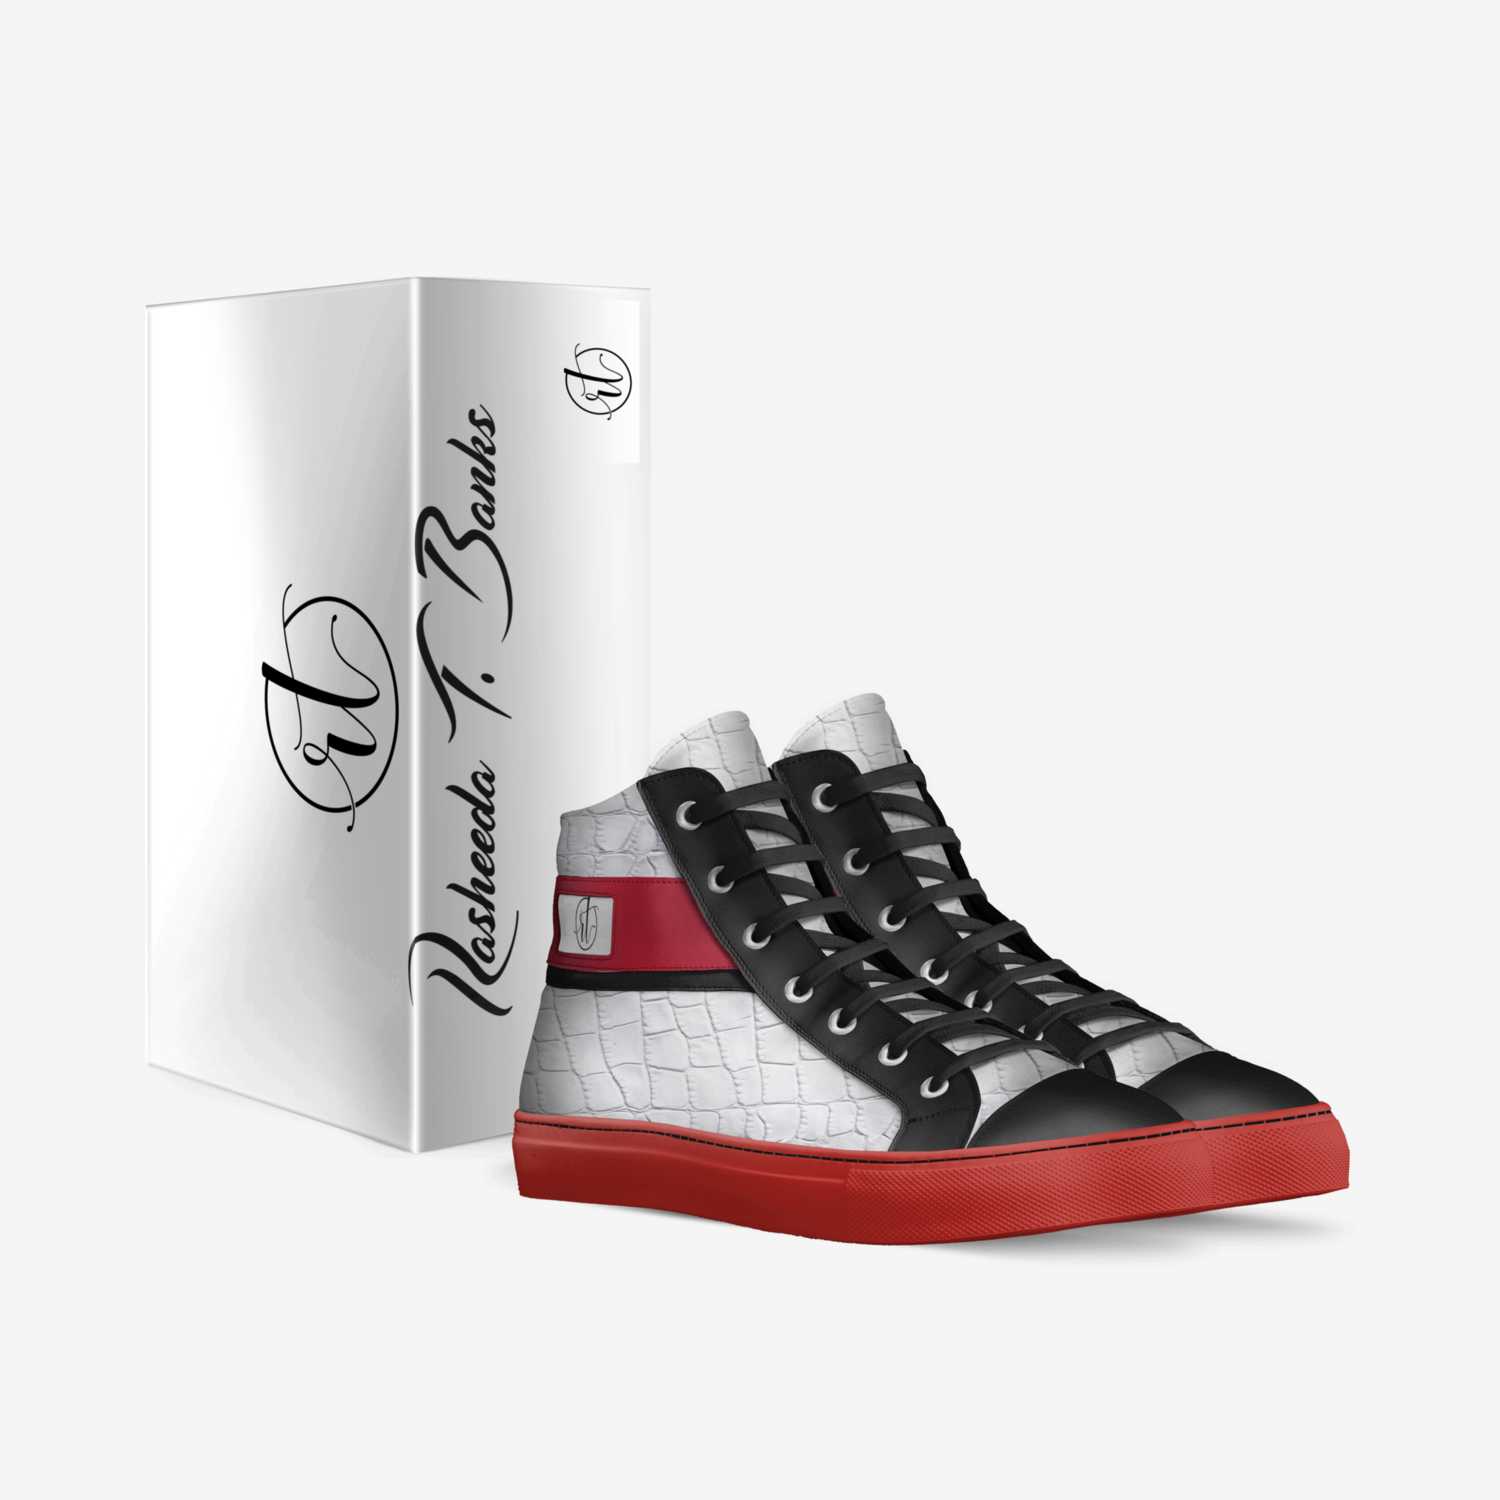 T BANKS custom made in Italy shoes by Rasheeda T Banks | Box view